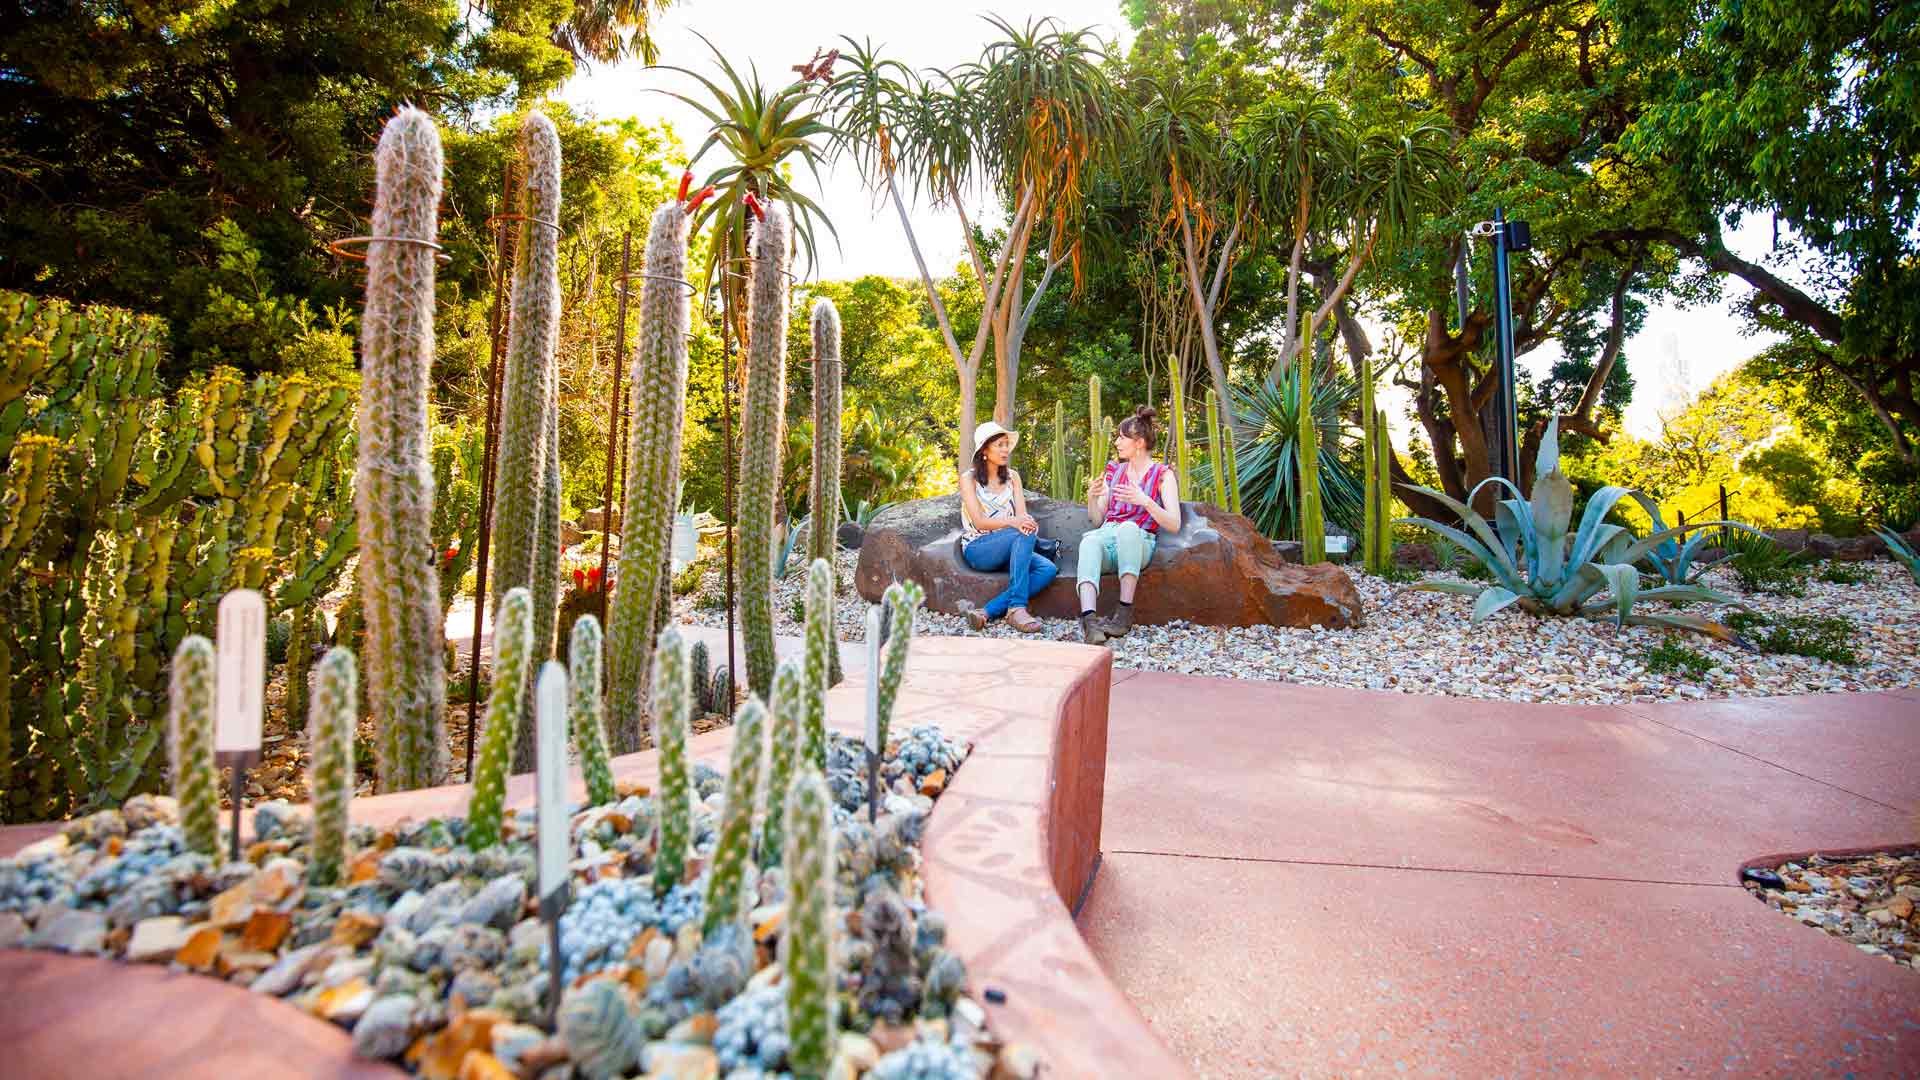 Melbourne S Royal Botanic Gardens Is Now Home To More Than 3000 Cacti And Succulents Concrete Playground